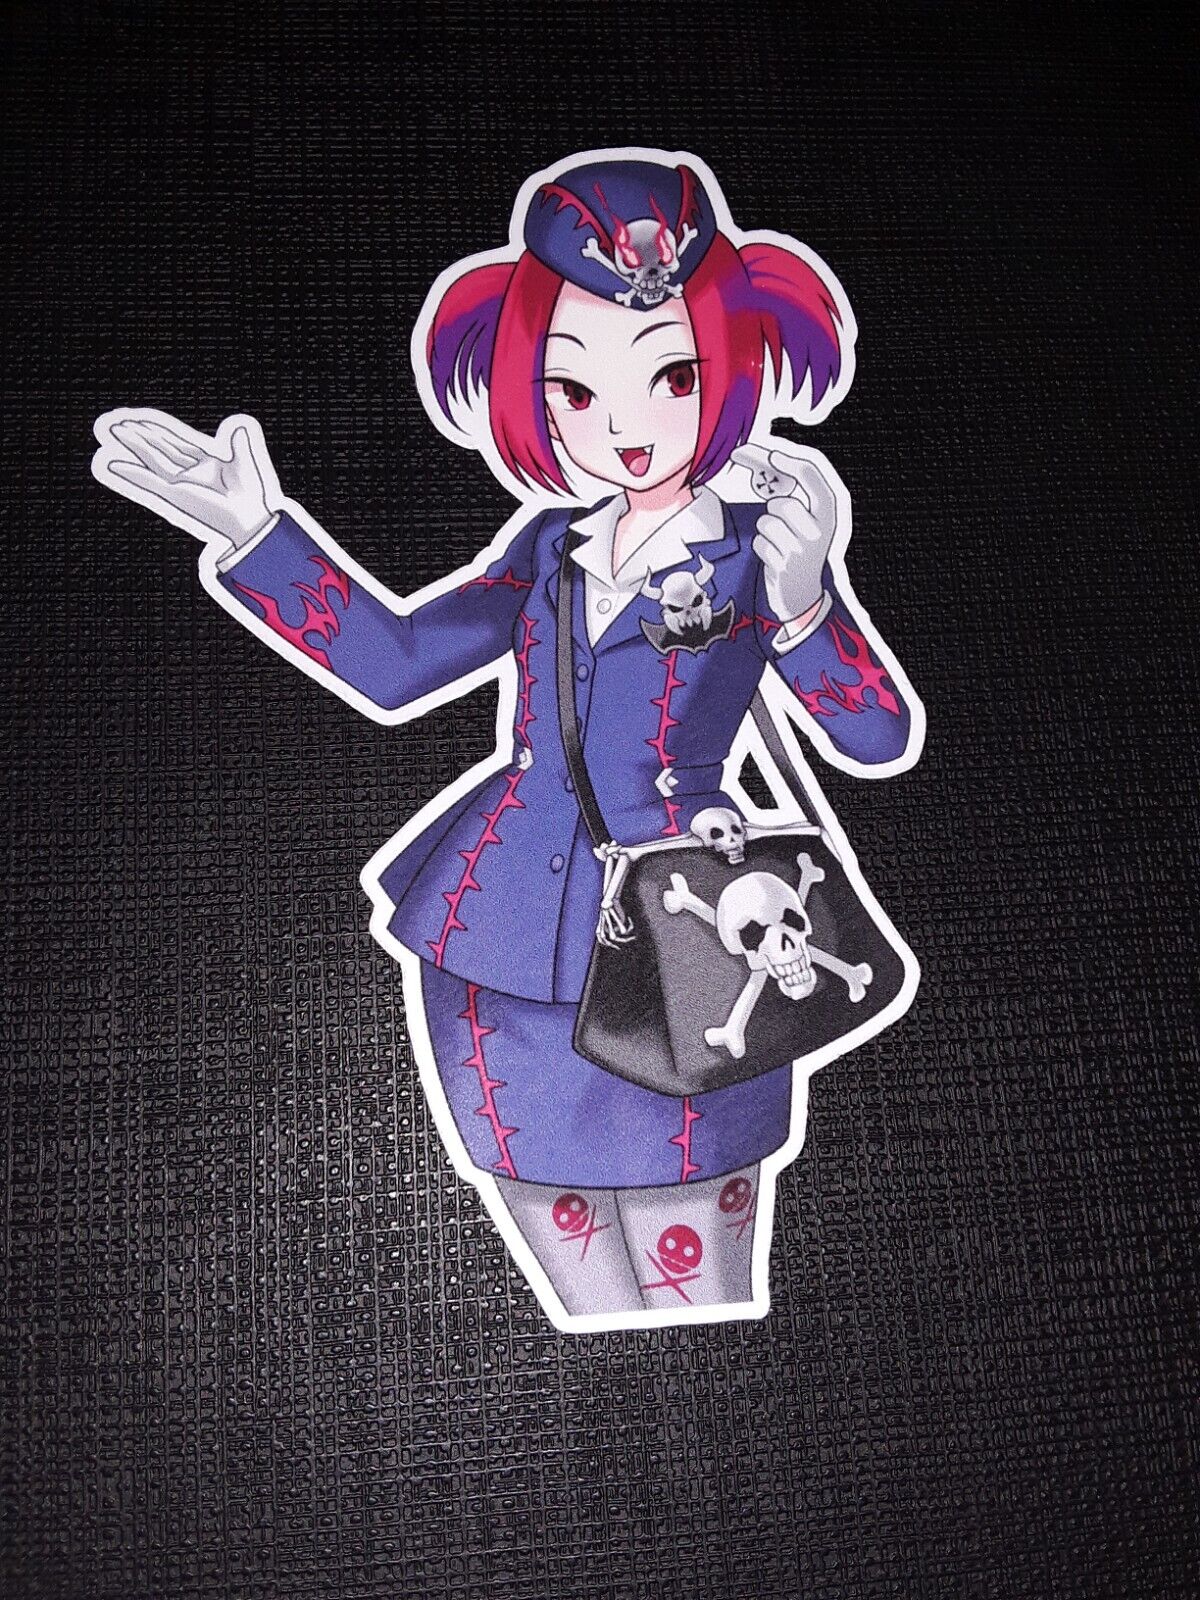 Yugioh Tour Guide from the Underworld Glossy Sticker Anime Walls, Windows